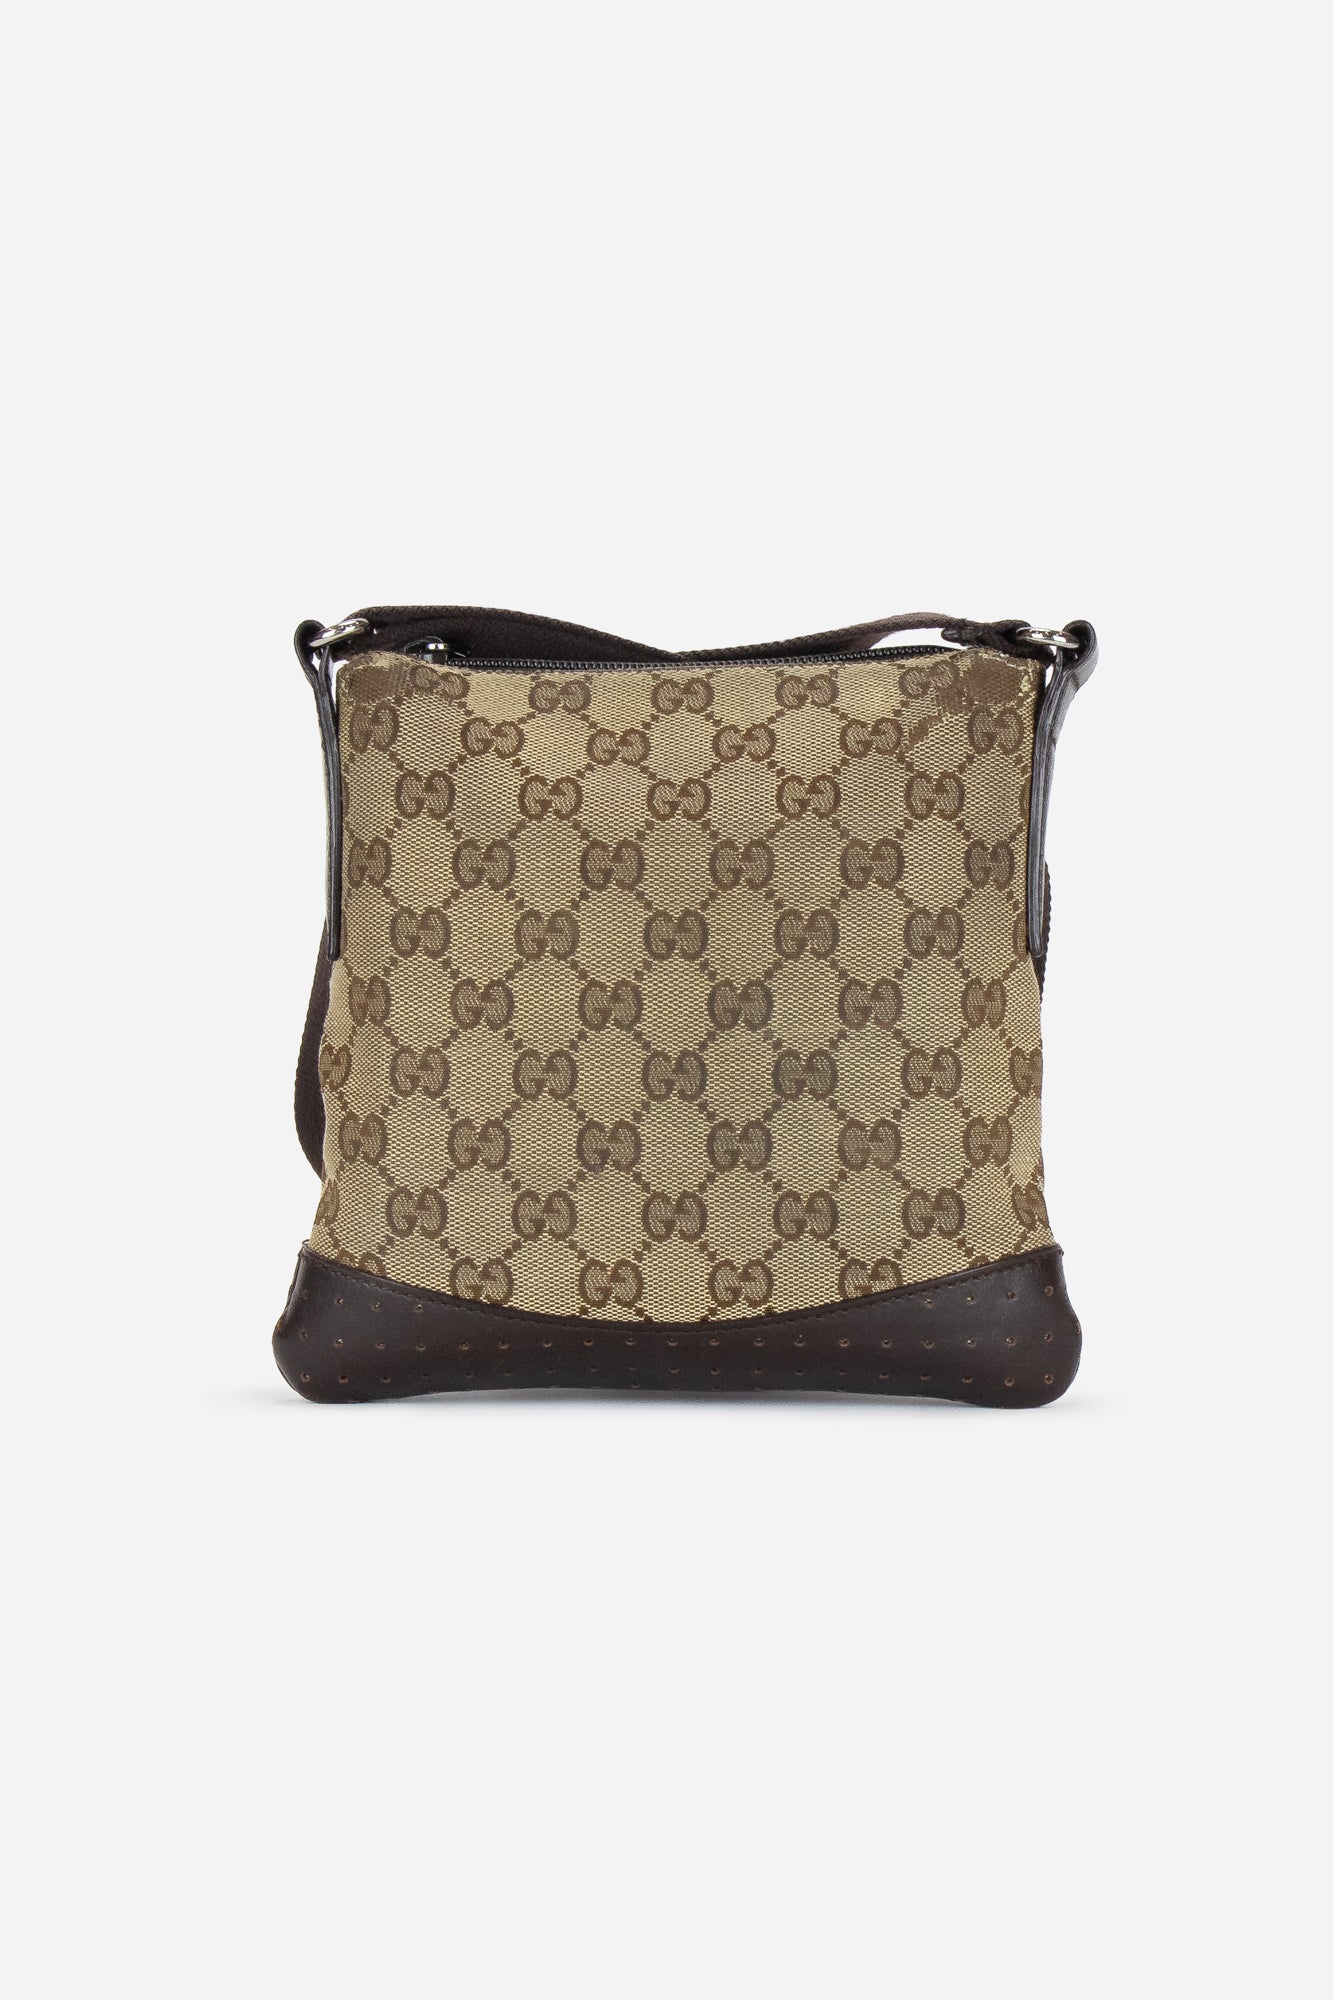 A Louis Vuitton Monogram Canvas and Leather Golf Bag. 33 x 12-1/2